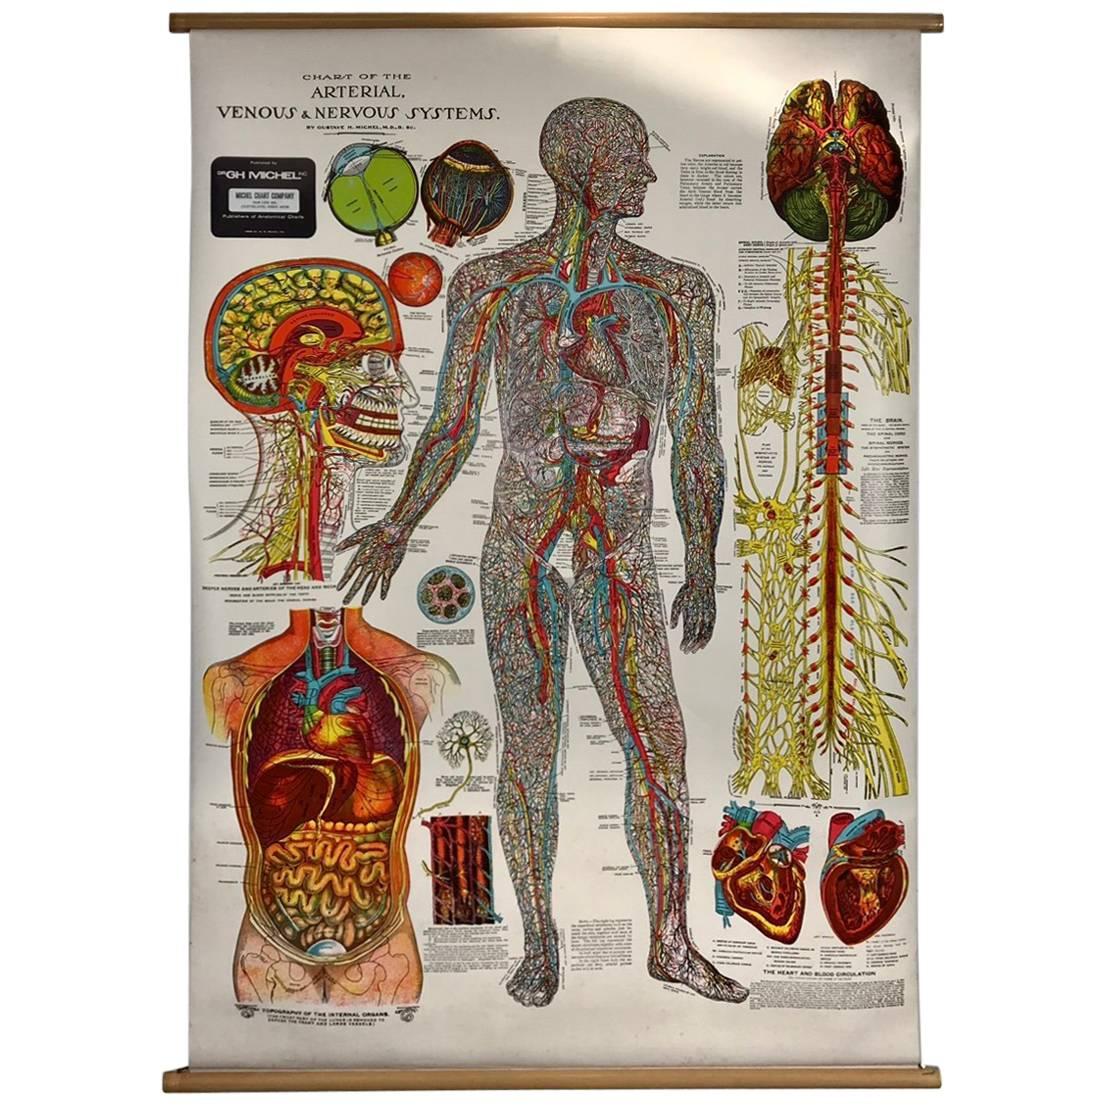 Vintage Anatomical Pull Down Chart 'Nervous Systems, GH Michel Company